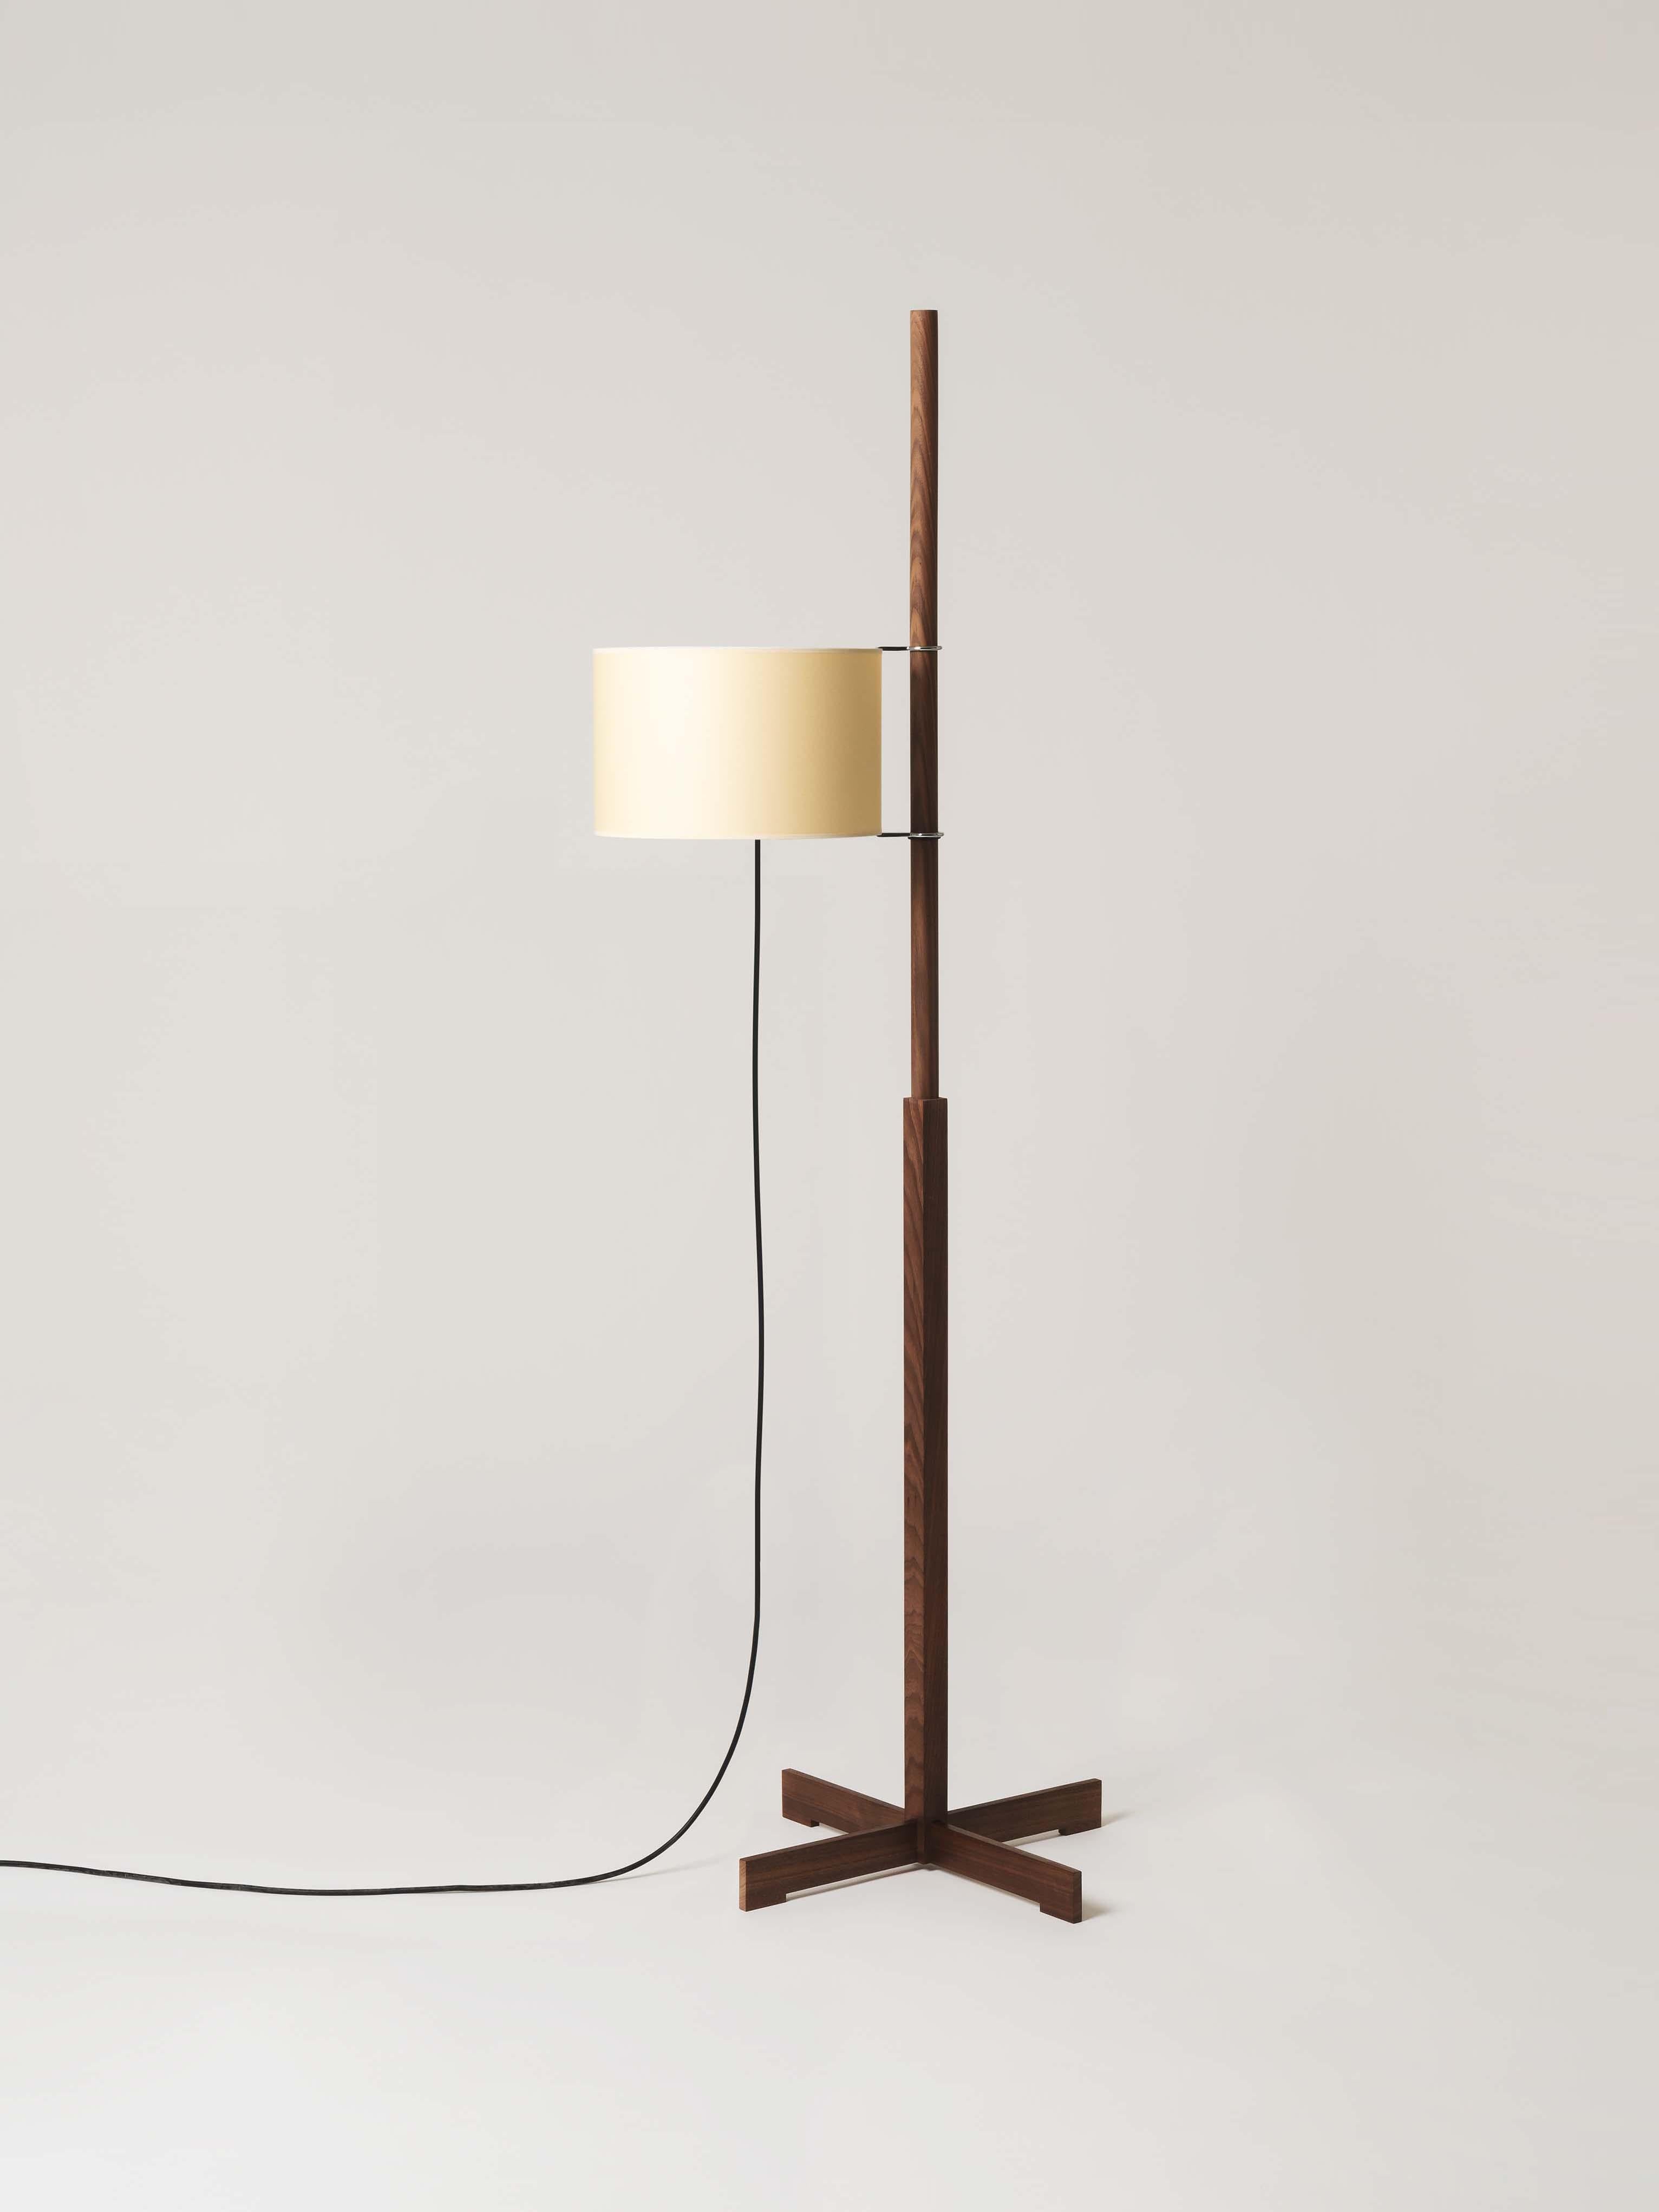 Beige and walnut TMM floor lamp by Miguel Milá
Dimensions: D 50 x W 60 x H 166 cm.
Materials: Cherry wood, parchment lampshade.
Available in 3 lampshades: beige, white and white with diffuser.
Available in 5 woods: beech, cherry, walnut, natural